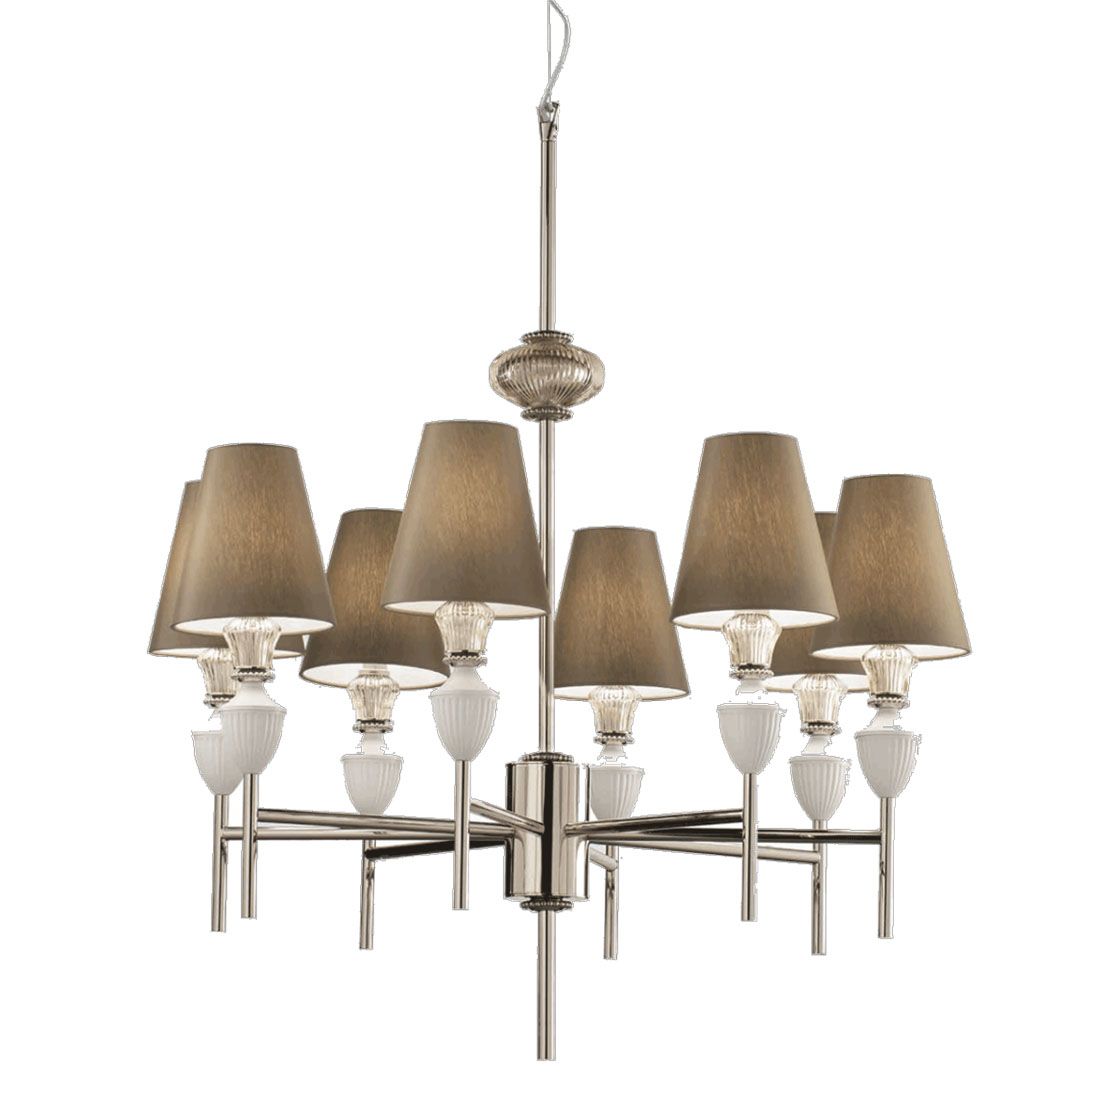 GIUNO chandelier by ITALAMP